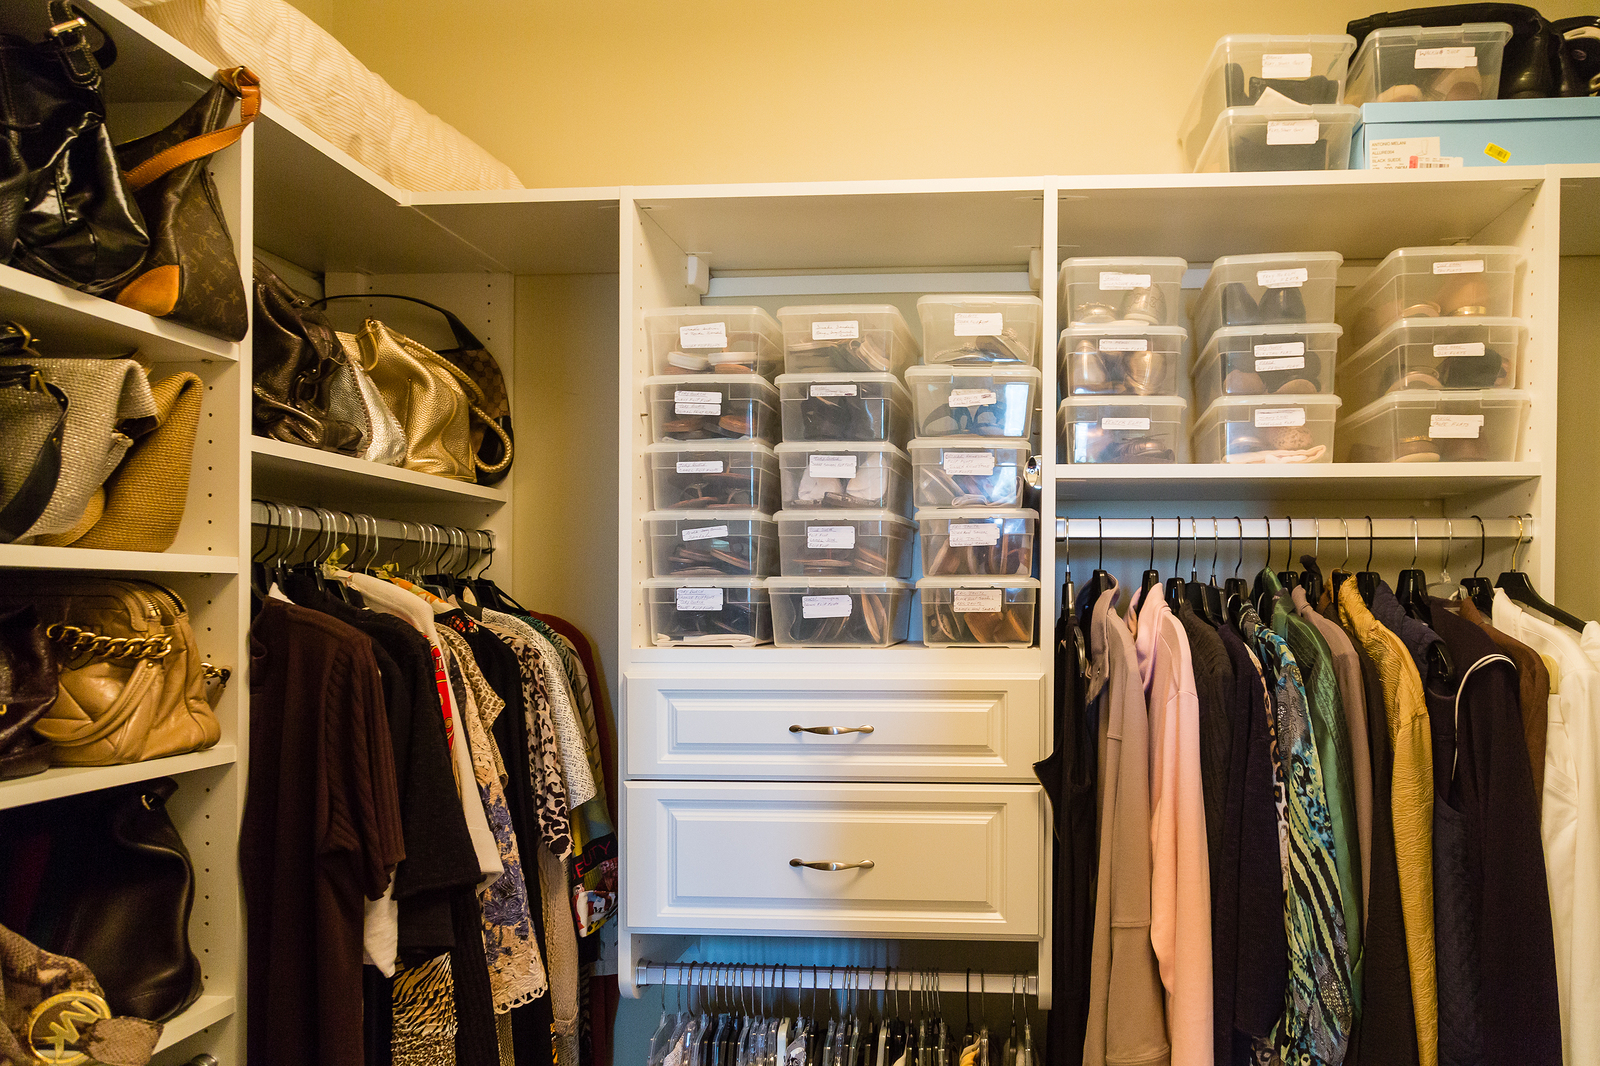 http://www.motivation4success.net/how-to-declutter-your-home-for-good/